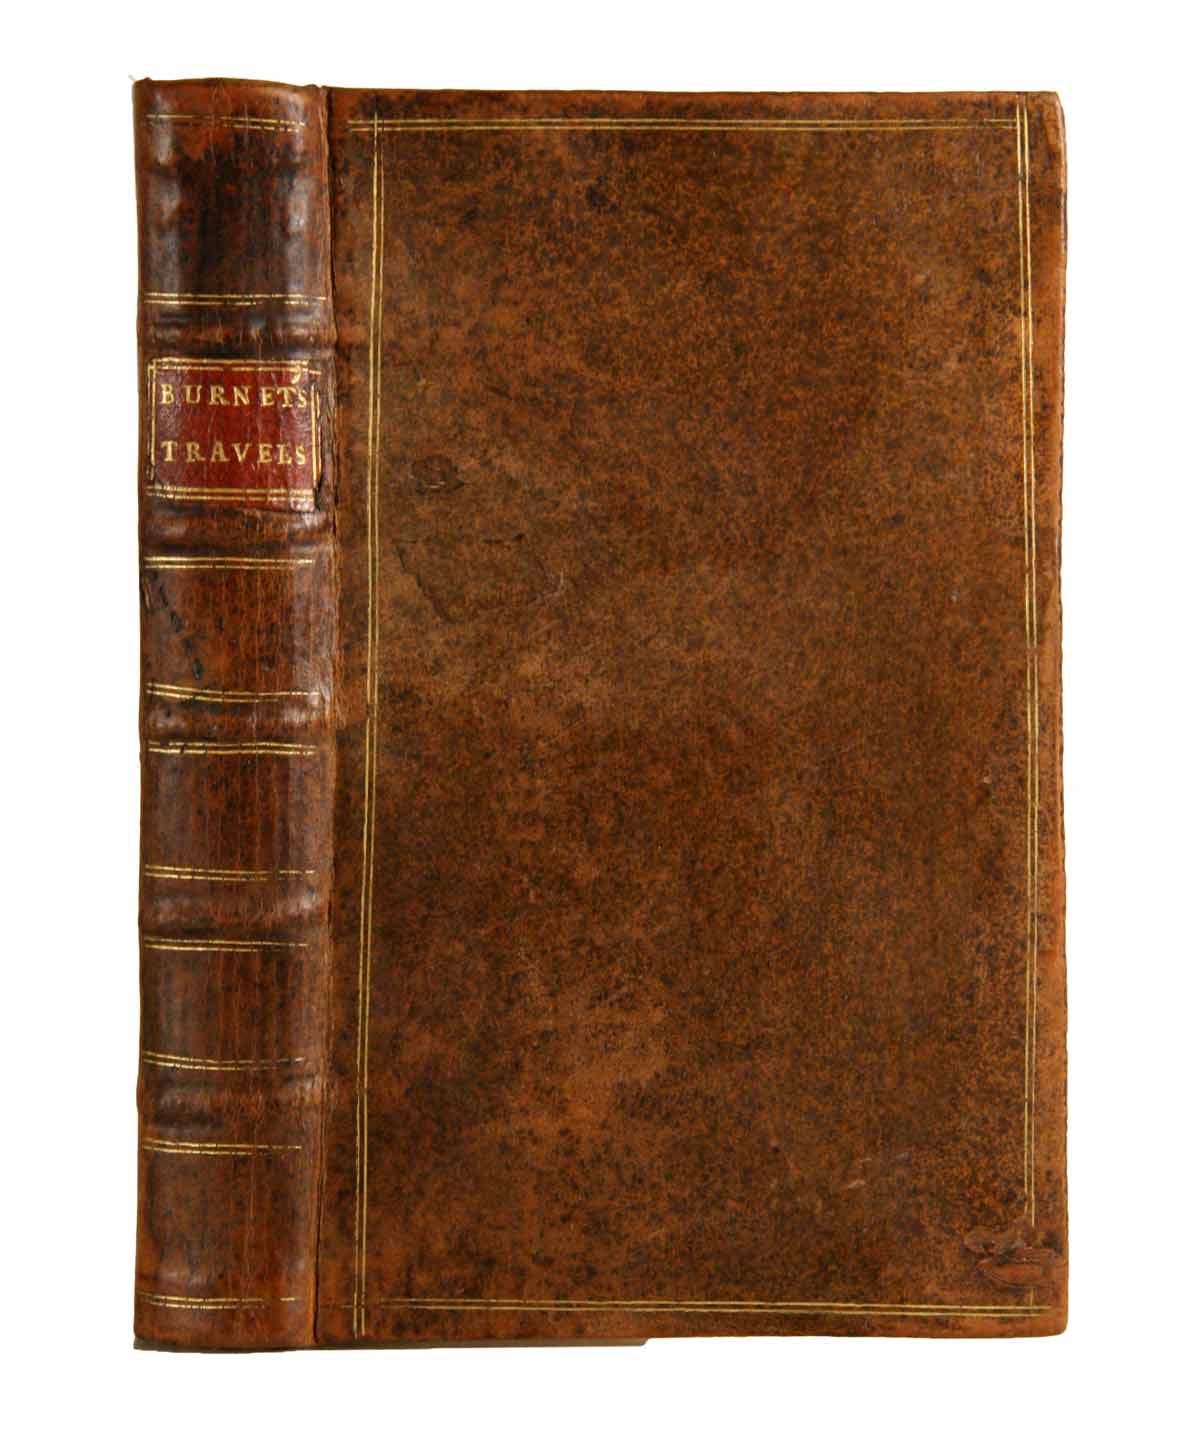 BURNET (Gilbert): - Burnet's Travels: Or, a collection of letters to the Hon. Robert Boyle, Esq; containing an account of what seem'd most remarkable in travelling thro' Switzerland, Italy, some parts of Germany, & in the years 1685, and 1686. To which is added, an appendix, containing some remarks on Switzerland and Italy. Communicated to the author by a person of quality. Together with a copious table of the contents of each letter. A new edition.